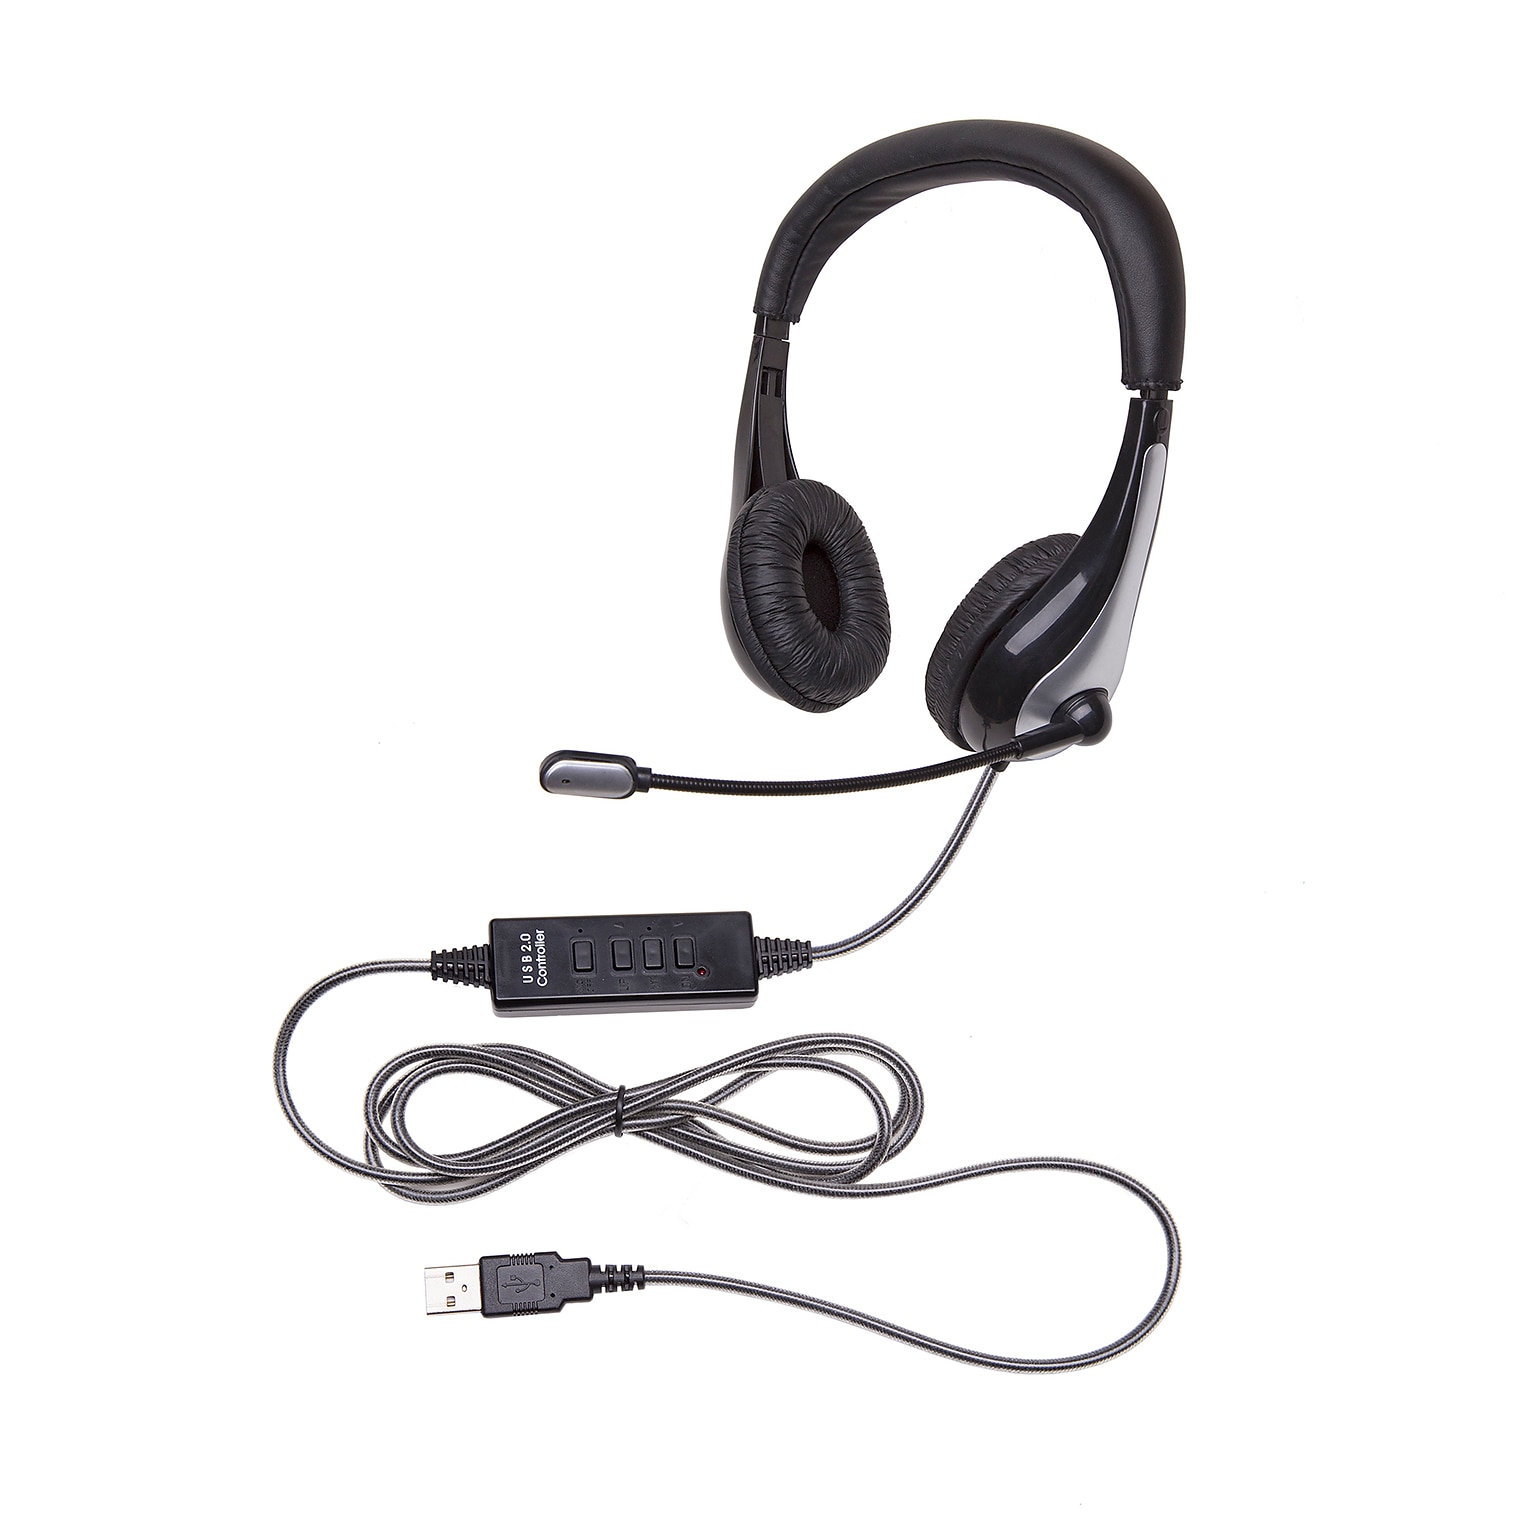 Califone NeoTech 1025MUSB On-Ear Stereo Headset with Gooseneck Microphone, USB Plug, Black (CAF1025MUSB)